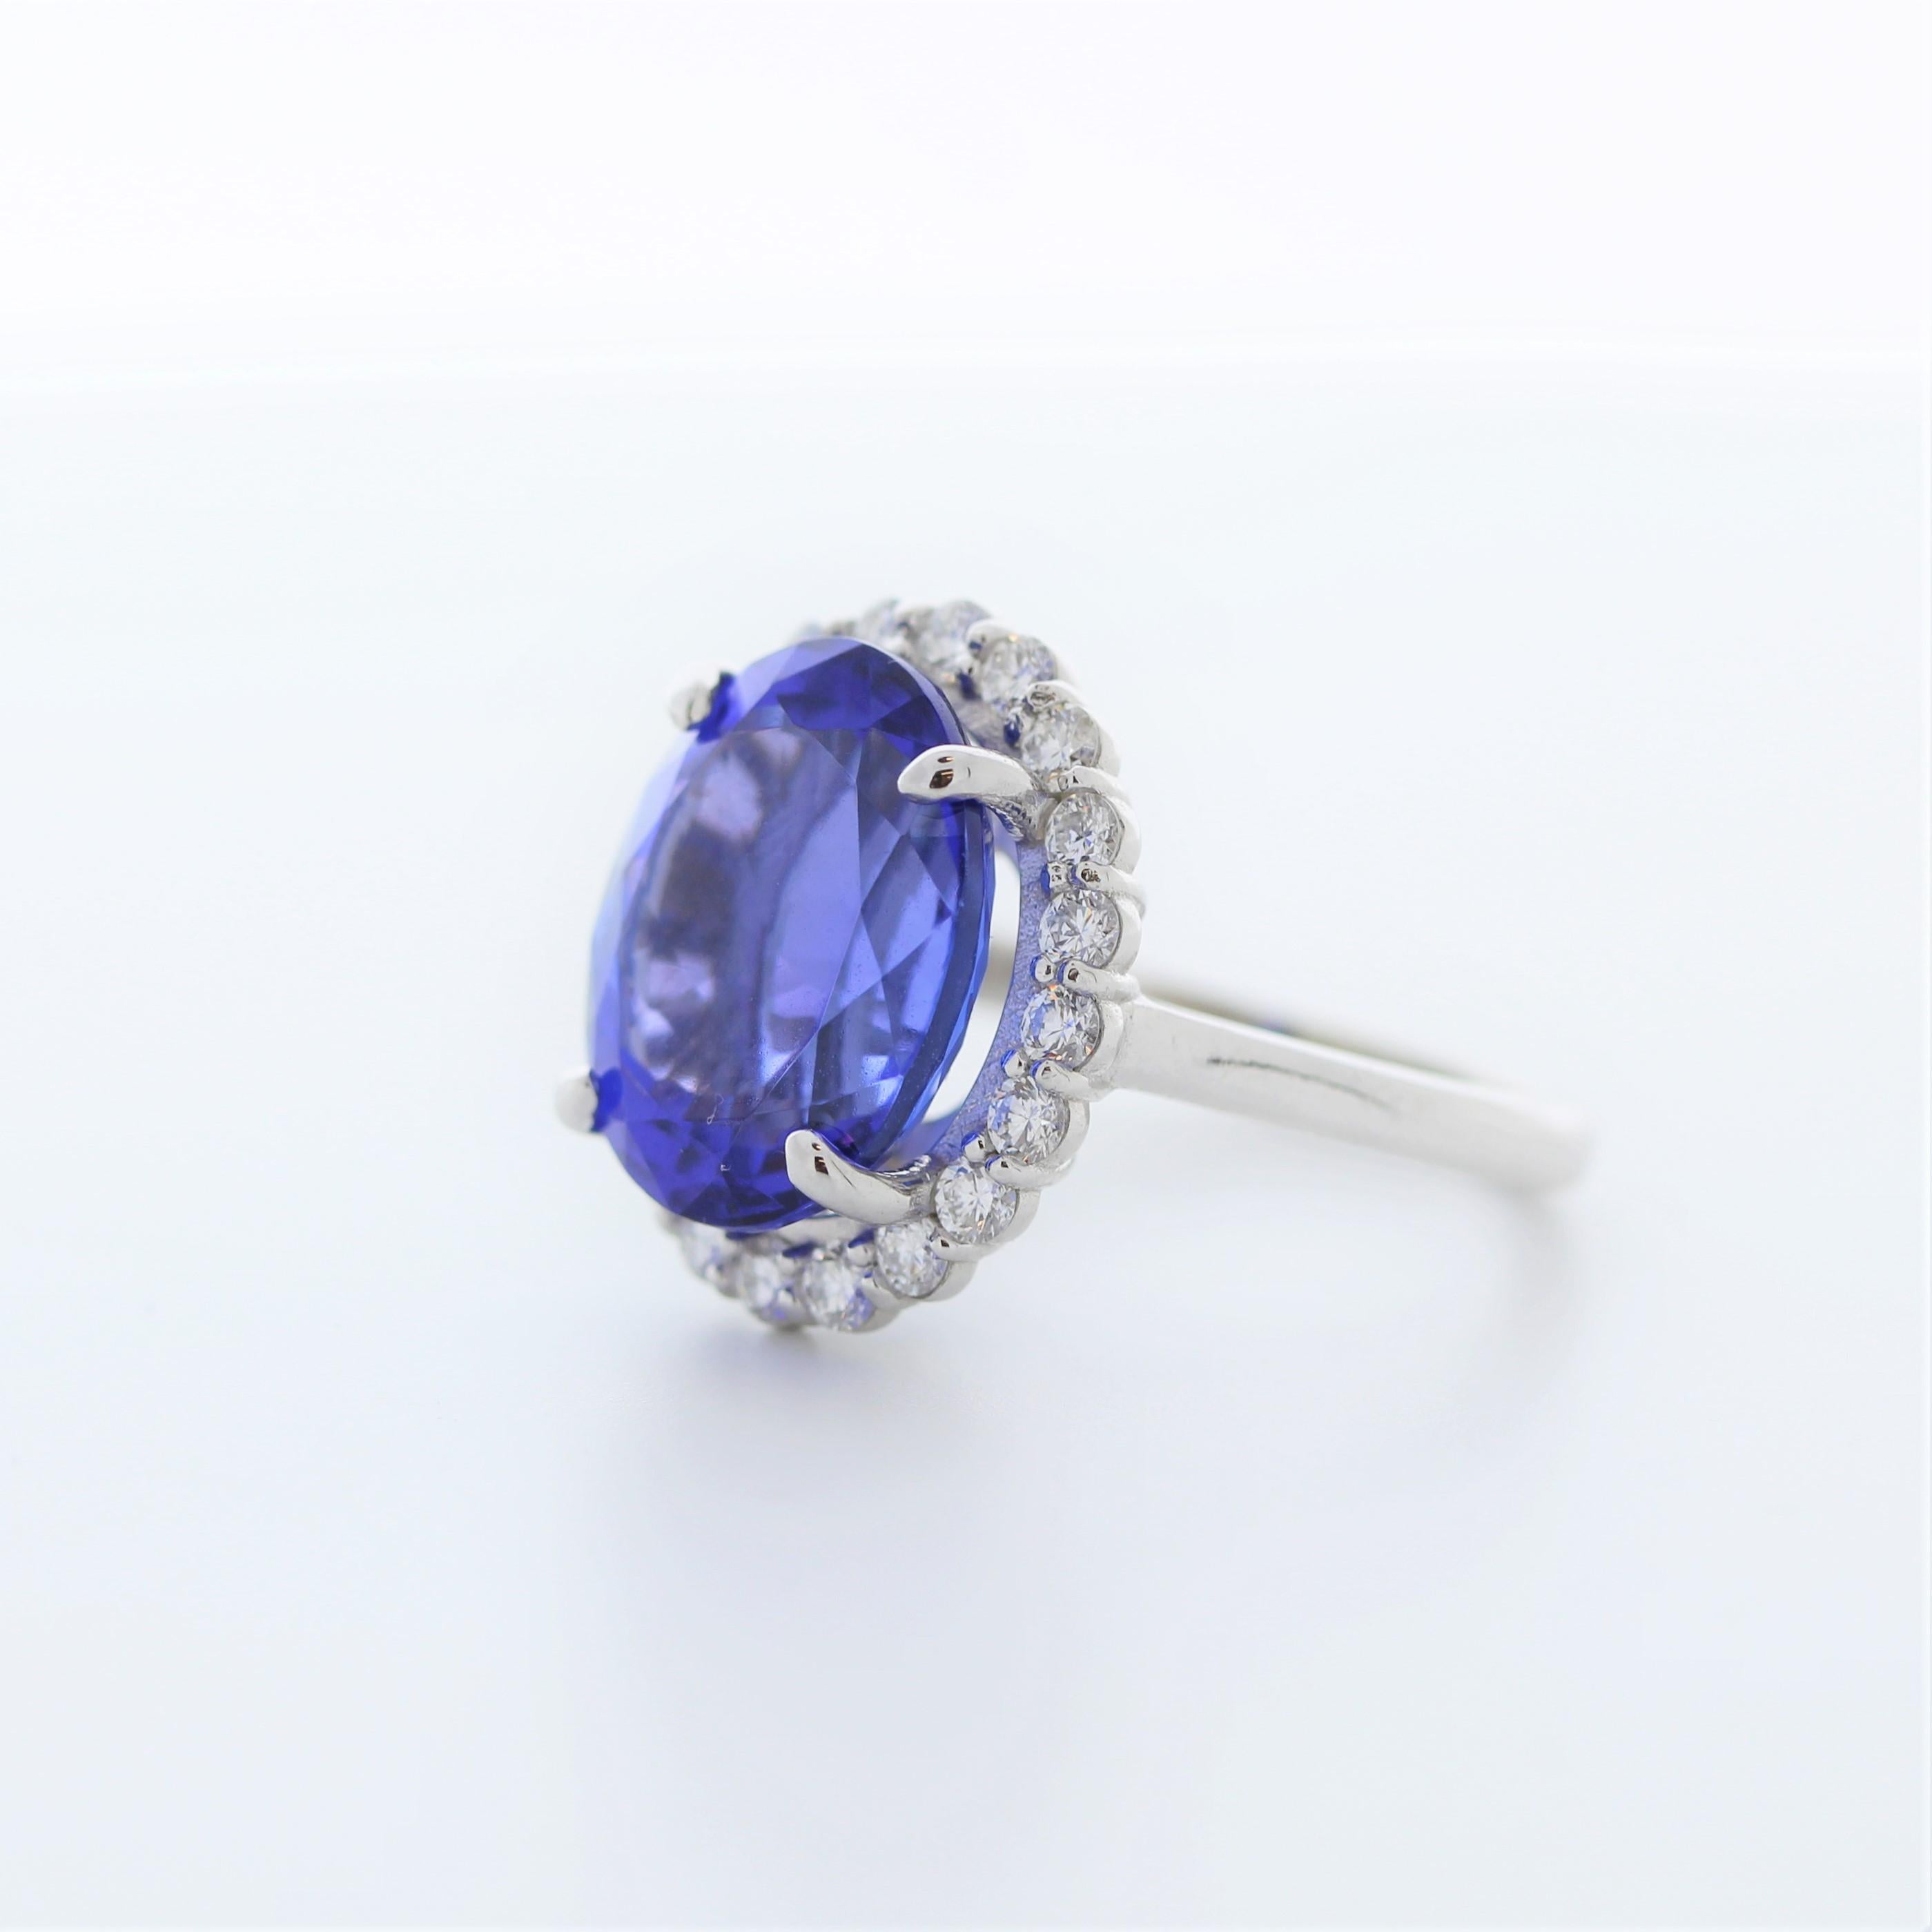 A fashion ring featuring a 14k white gold band with a main stone of a 9.22 carat oval-cut bluish violet tanzanite and 20 round-cut diamonds totaling 0.8 carats as side stones would be a stunning and vibrant choice.